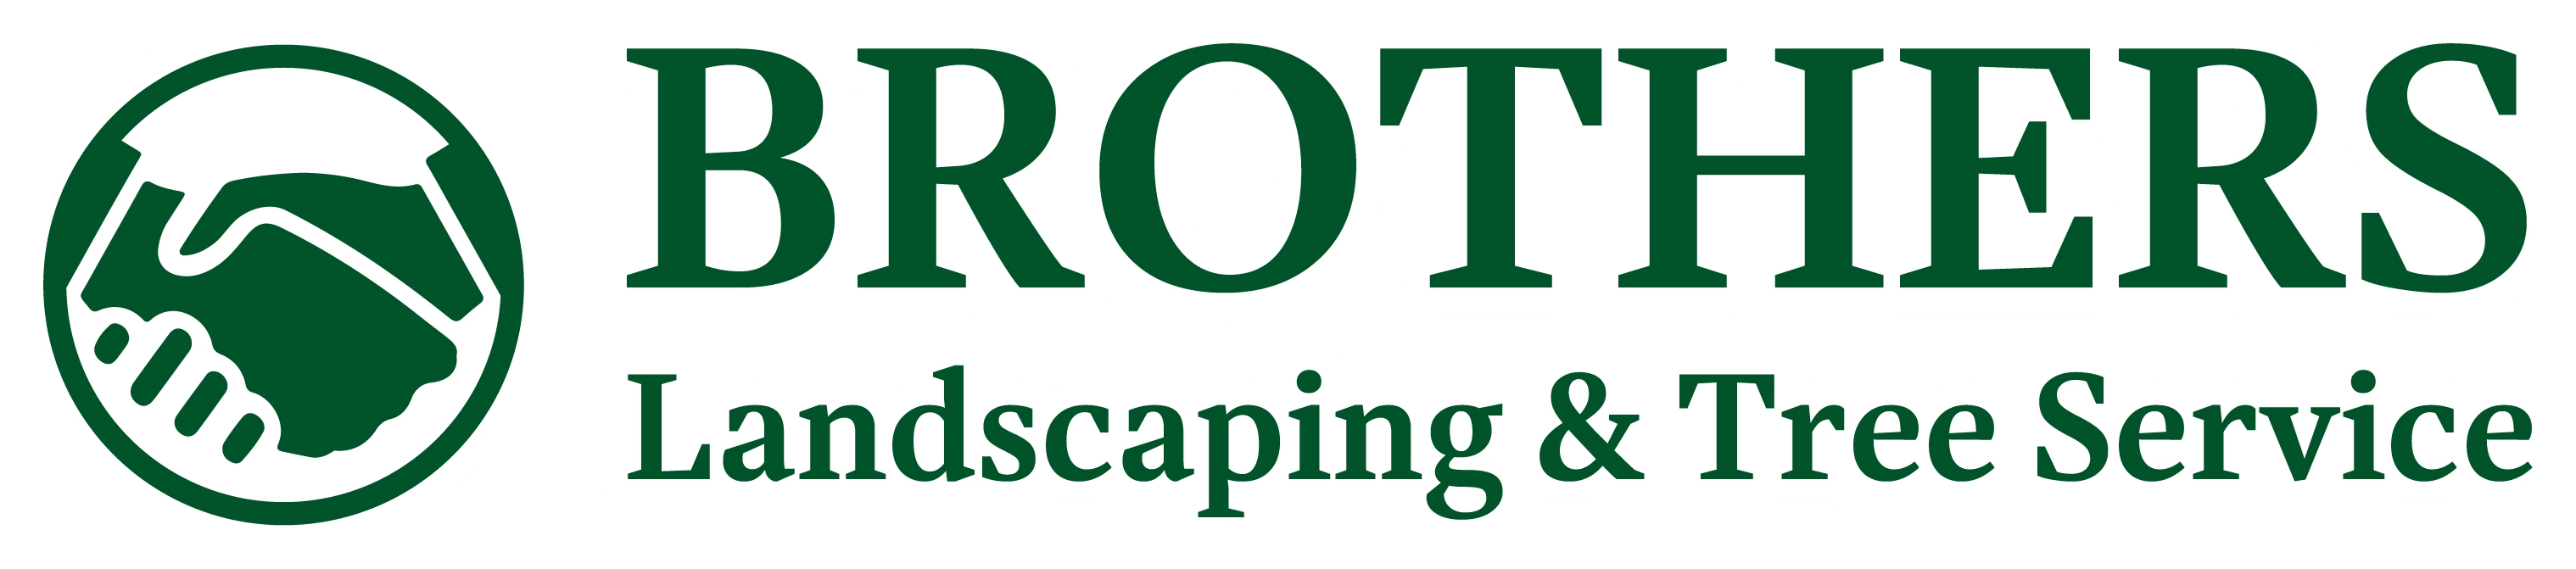 Brothers landscaping & tree service Logo